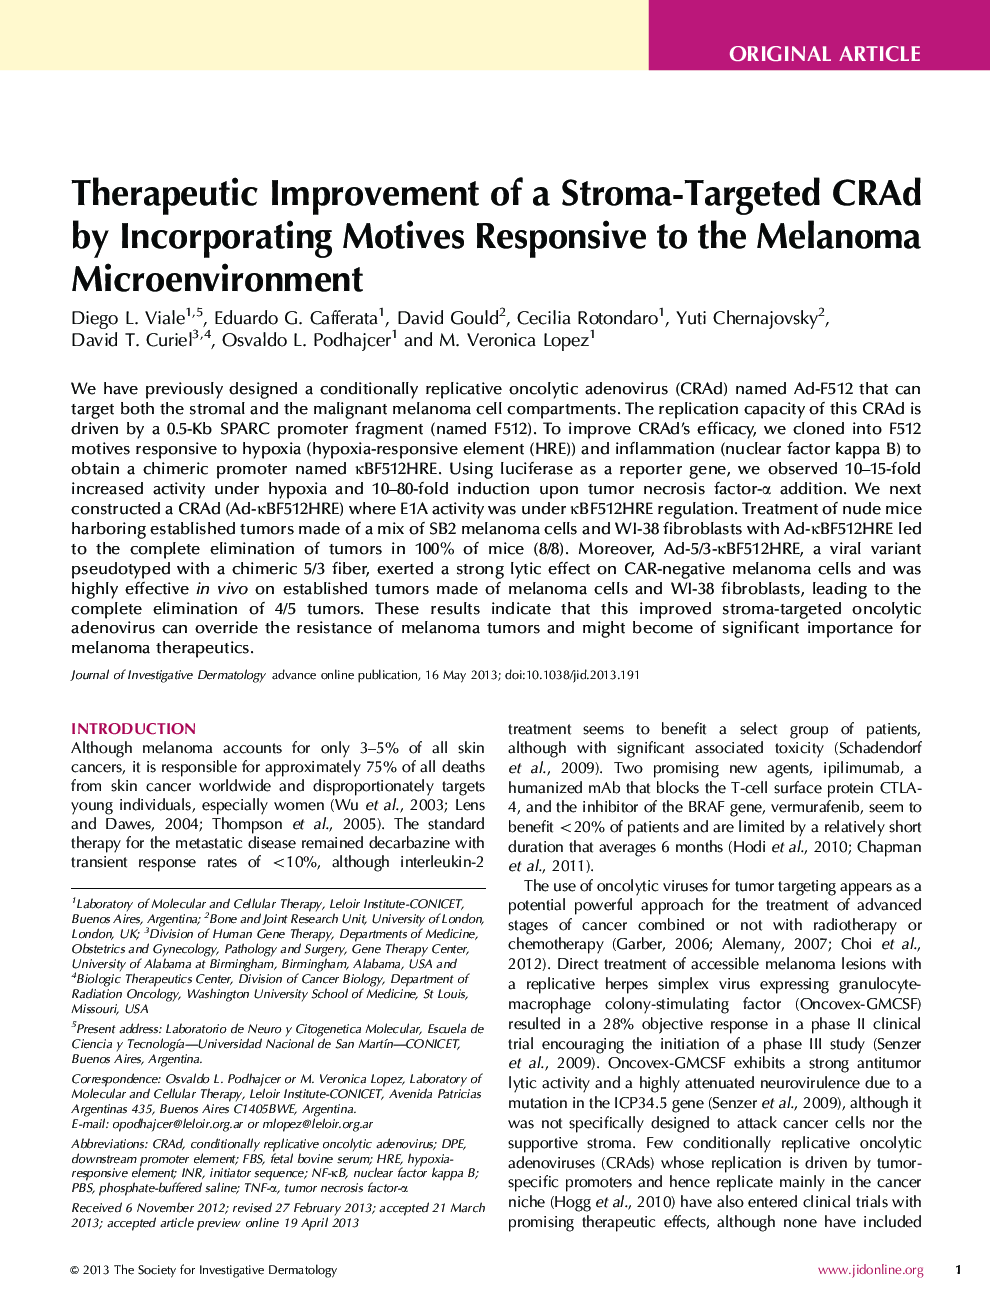 Therapeutic Improvement of a Stroma-Targeted CRAd by Incorporating Motives Responsive to the Melanoma Microenvironment